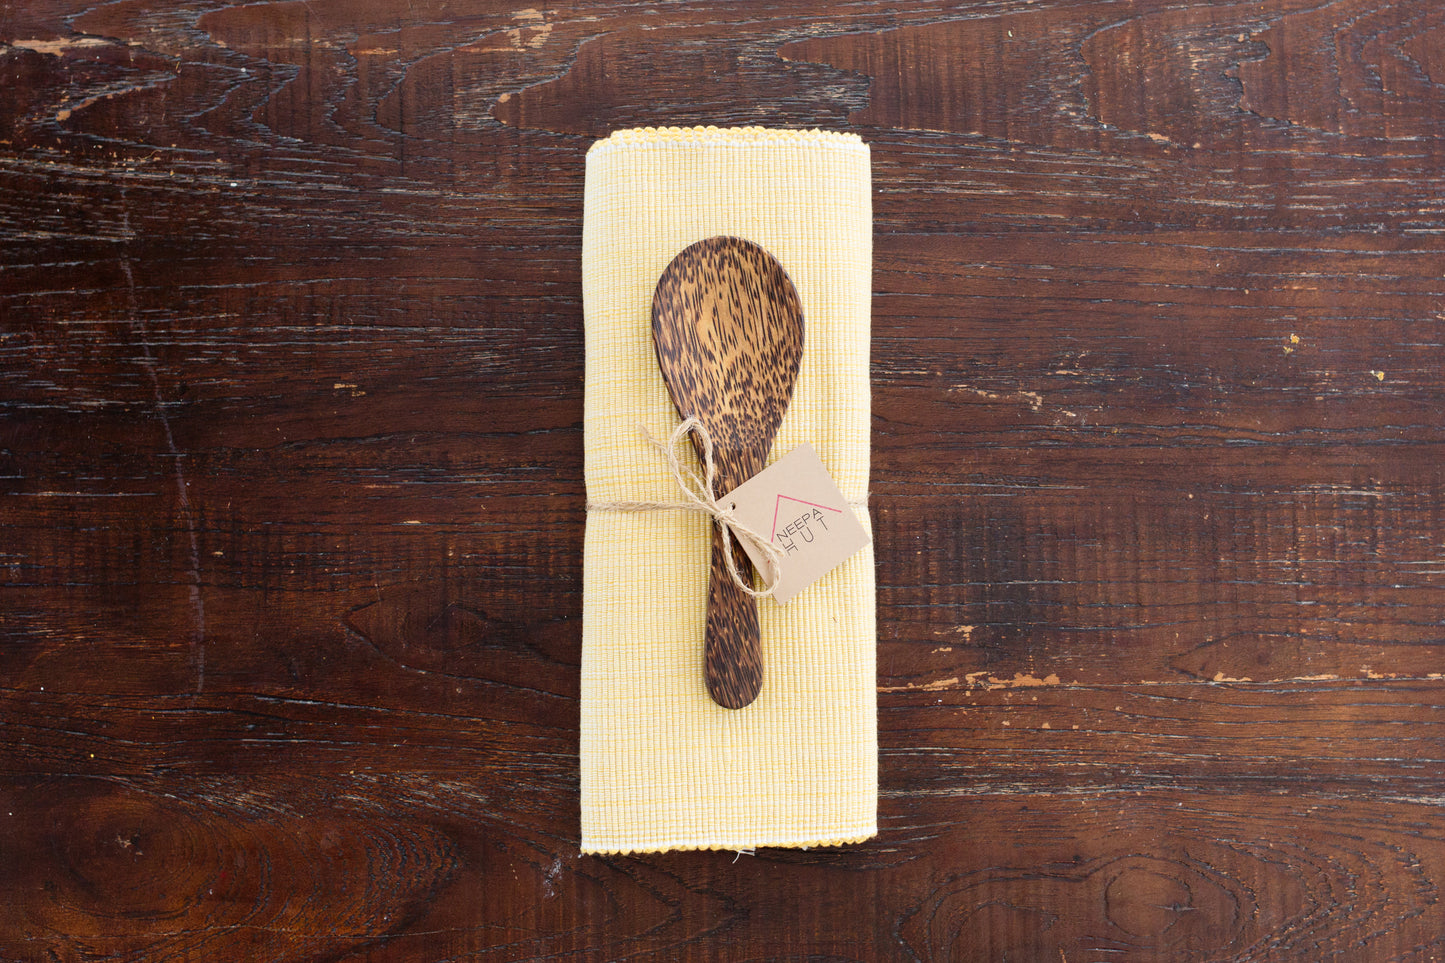 Wooden Palm Spoon